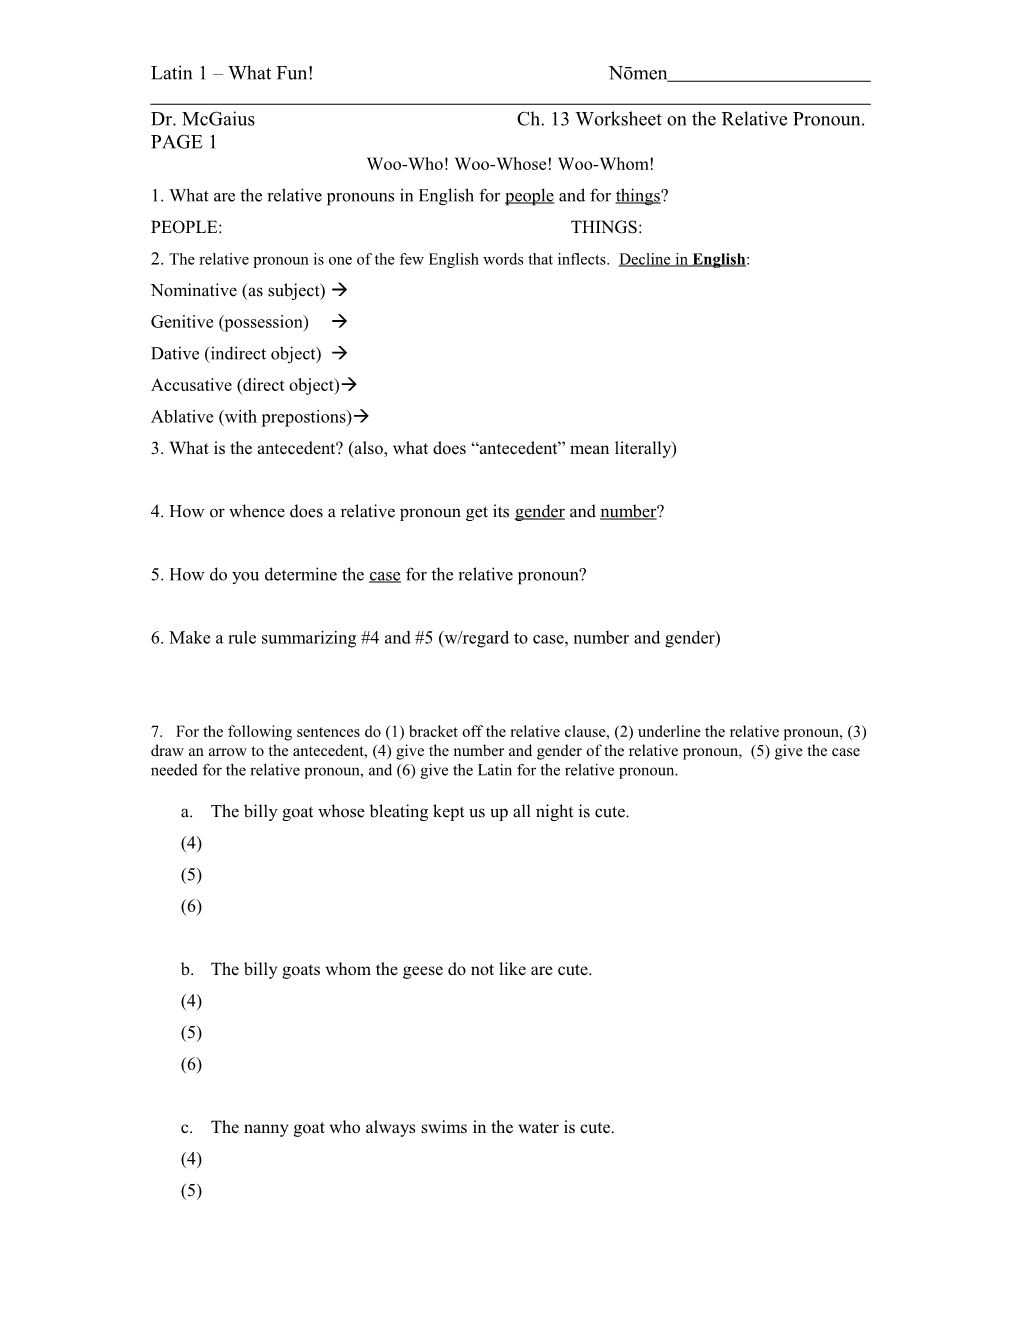 Dr. Mcgaius Ch. 13 Worksheet on the Relative Pronoun. PAGE 1